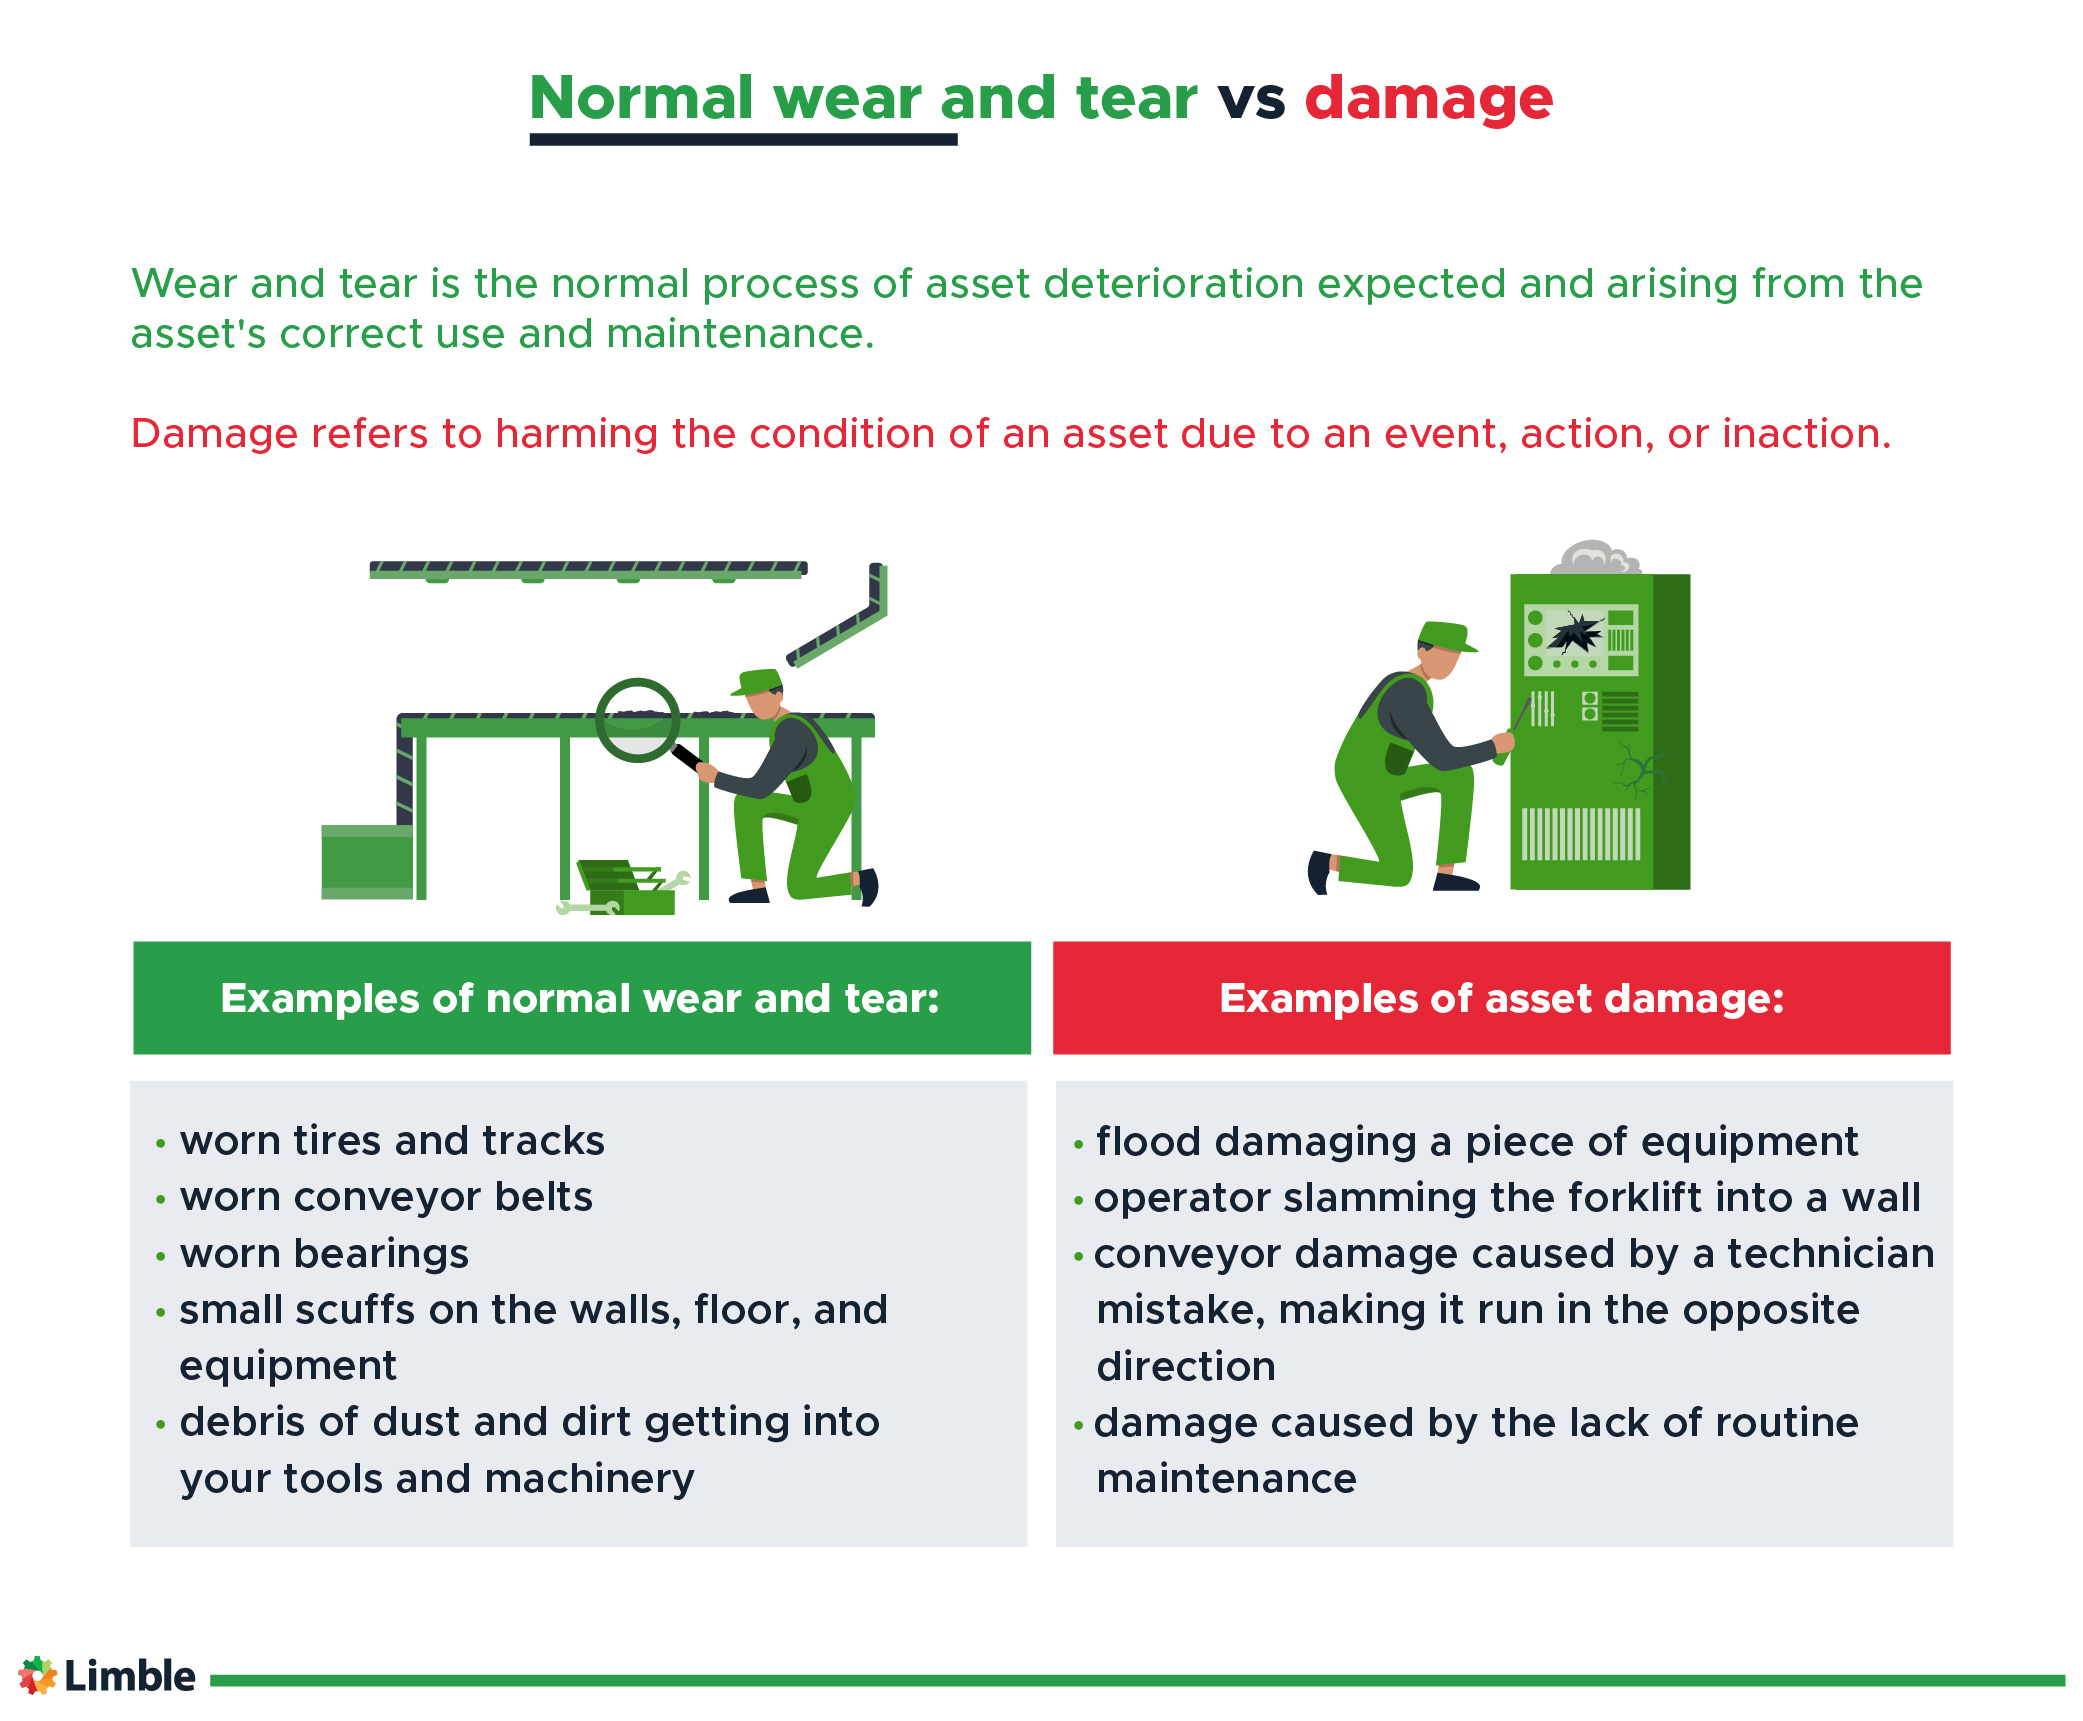 Outlining the differences between wear and tear and damage